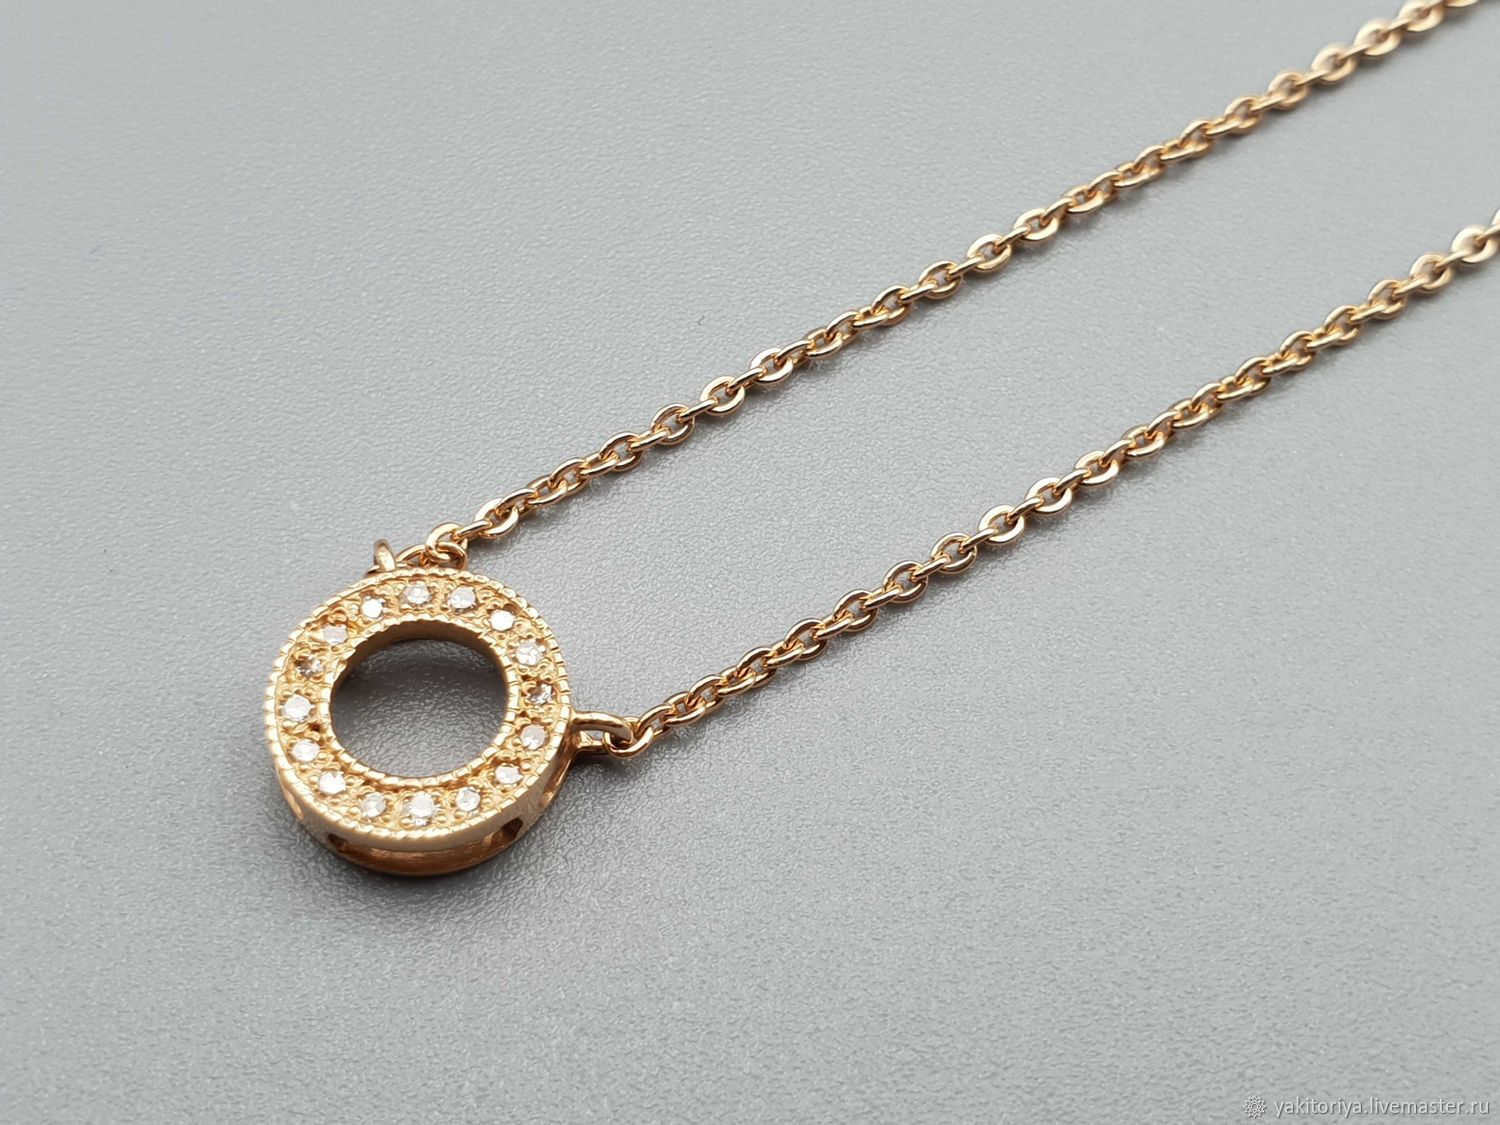 Gold necklace with diamonds, Necklace, Moscow,  Фото №1